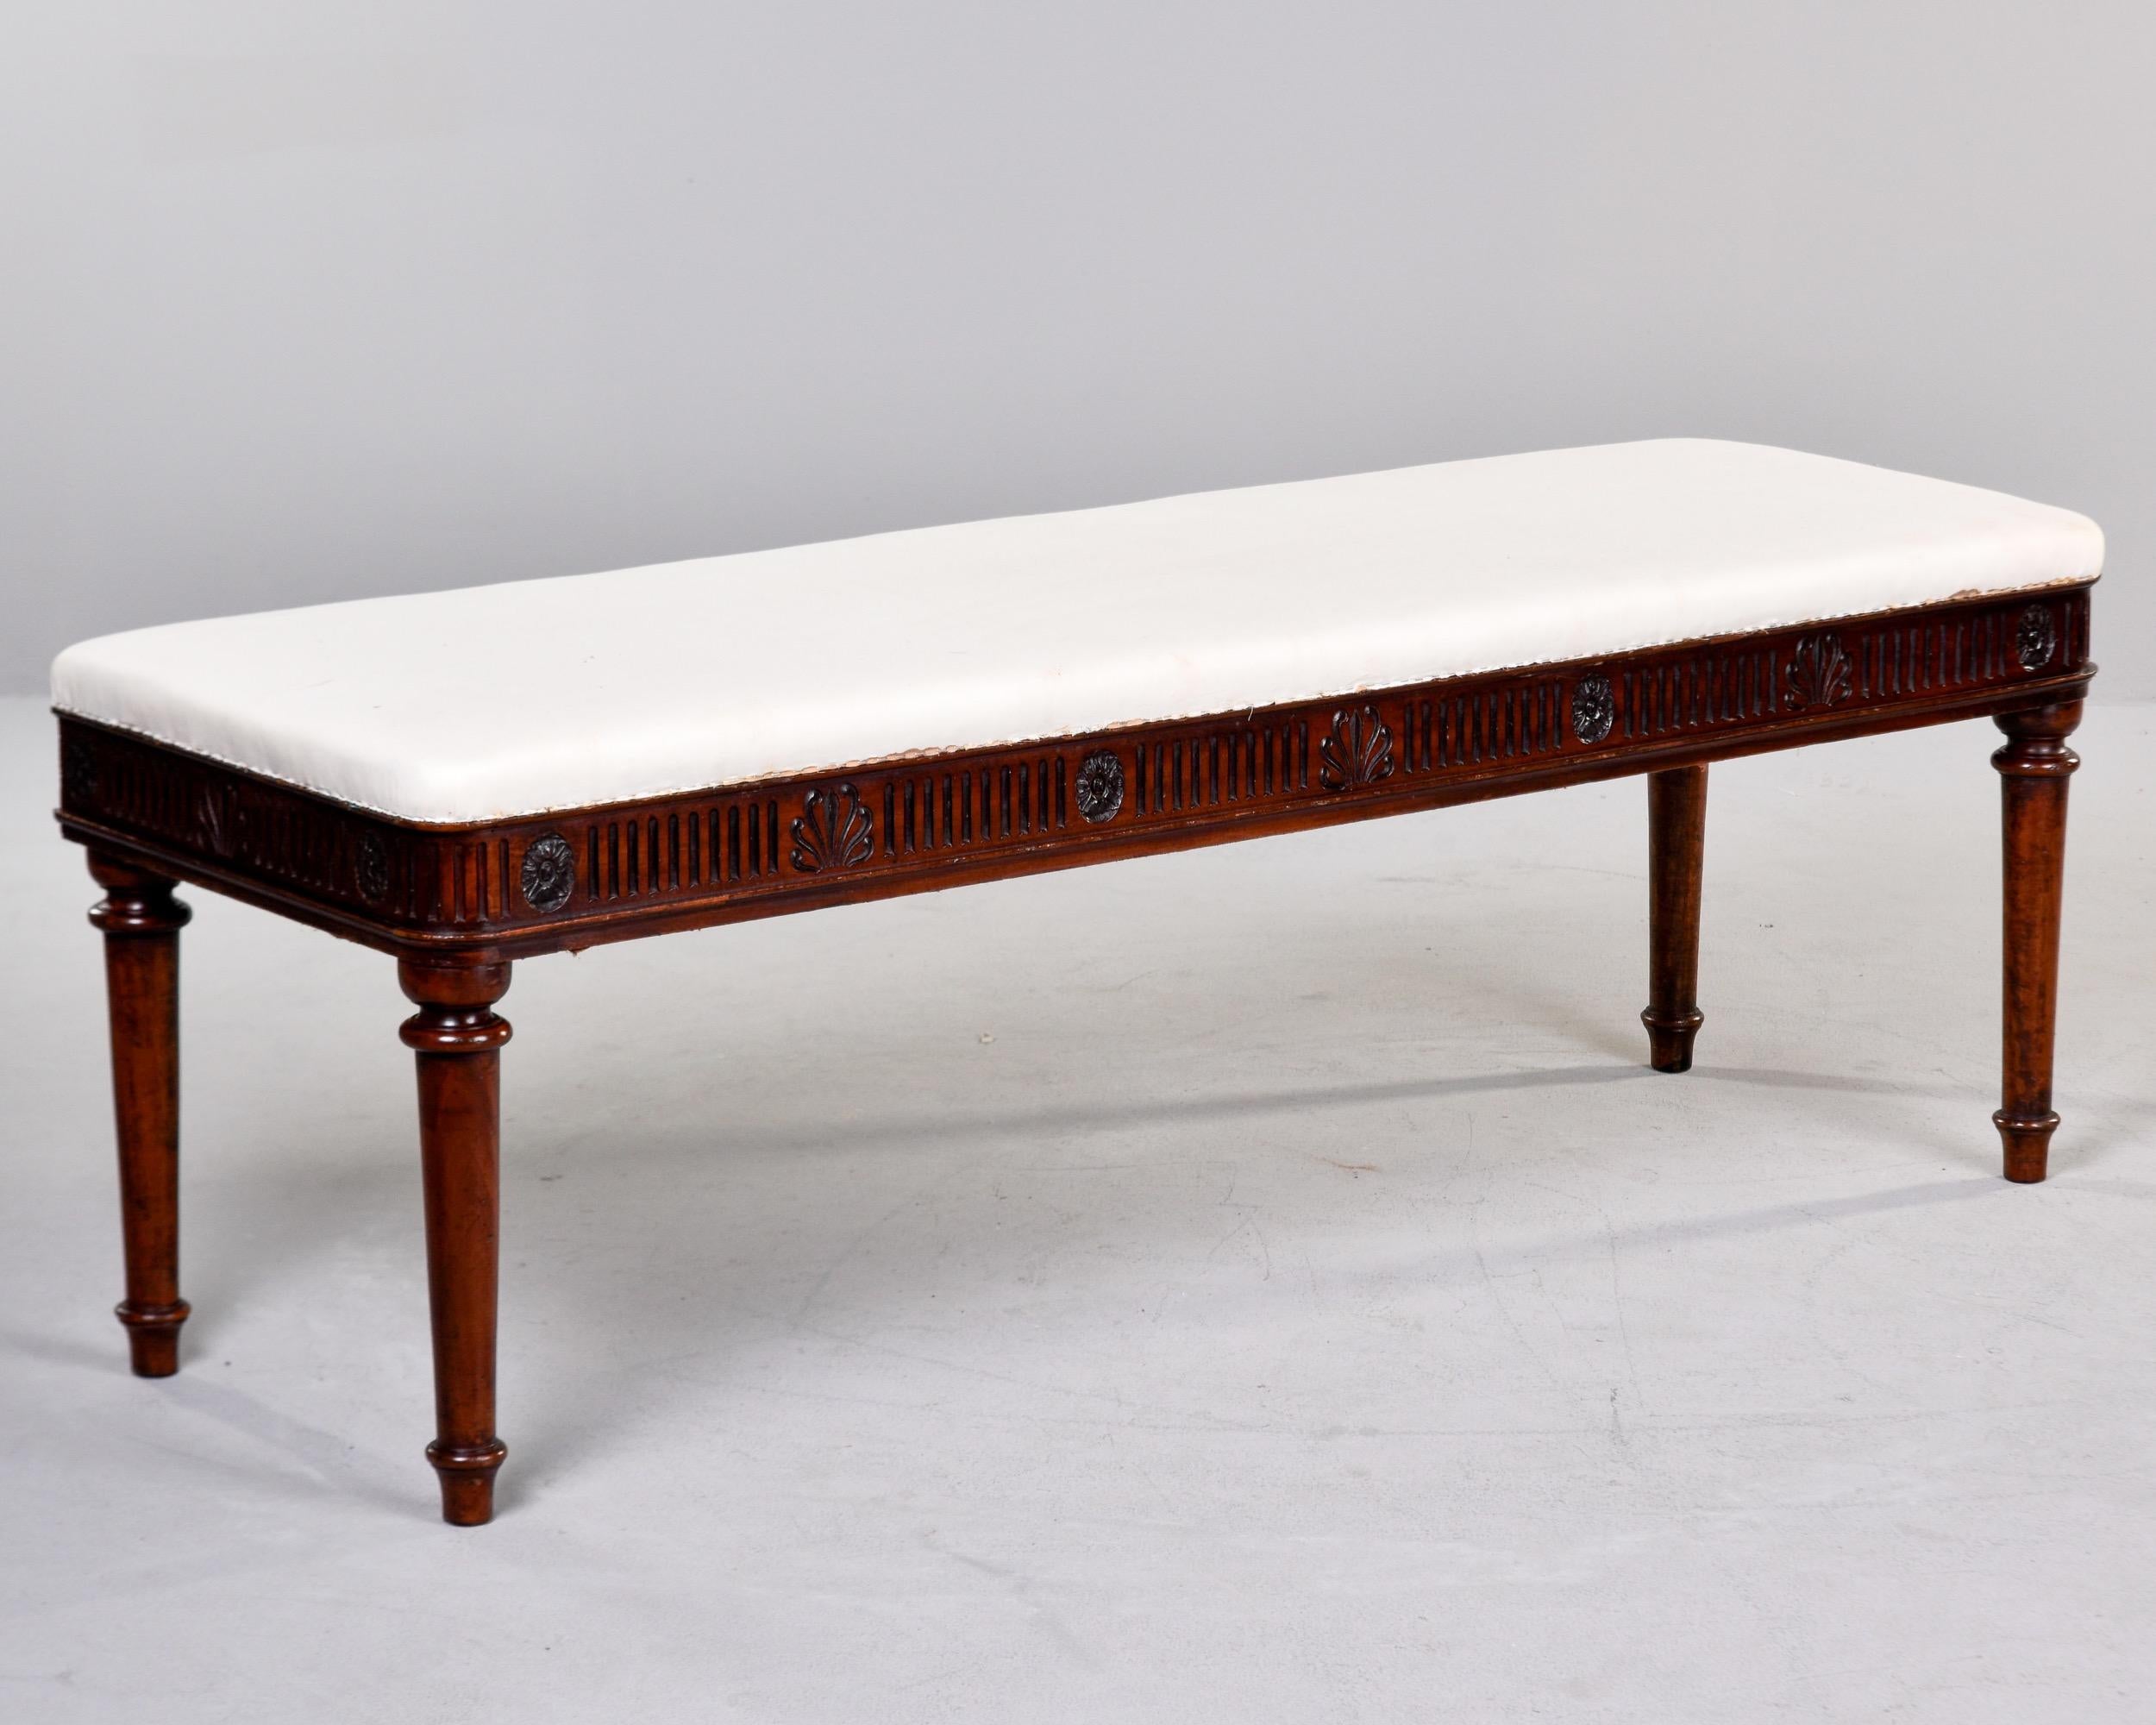 Mid 19th C English Upholstered Mahogany Window Seat with Reeded Detail   For Sale 5